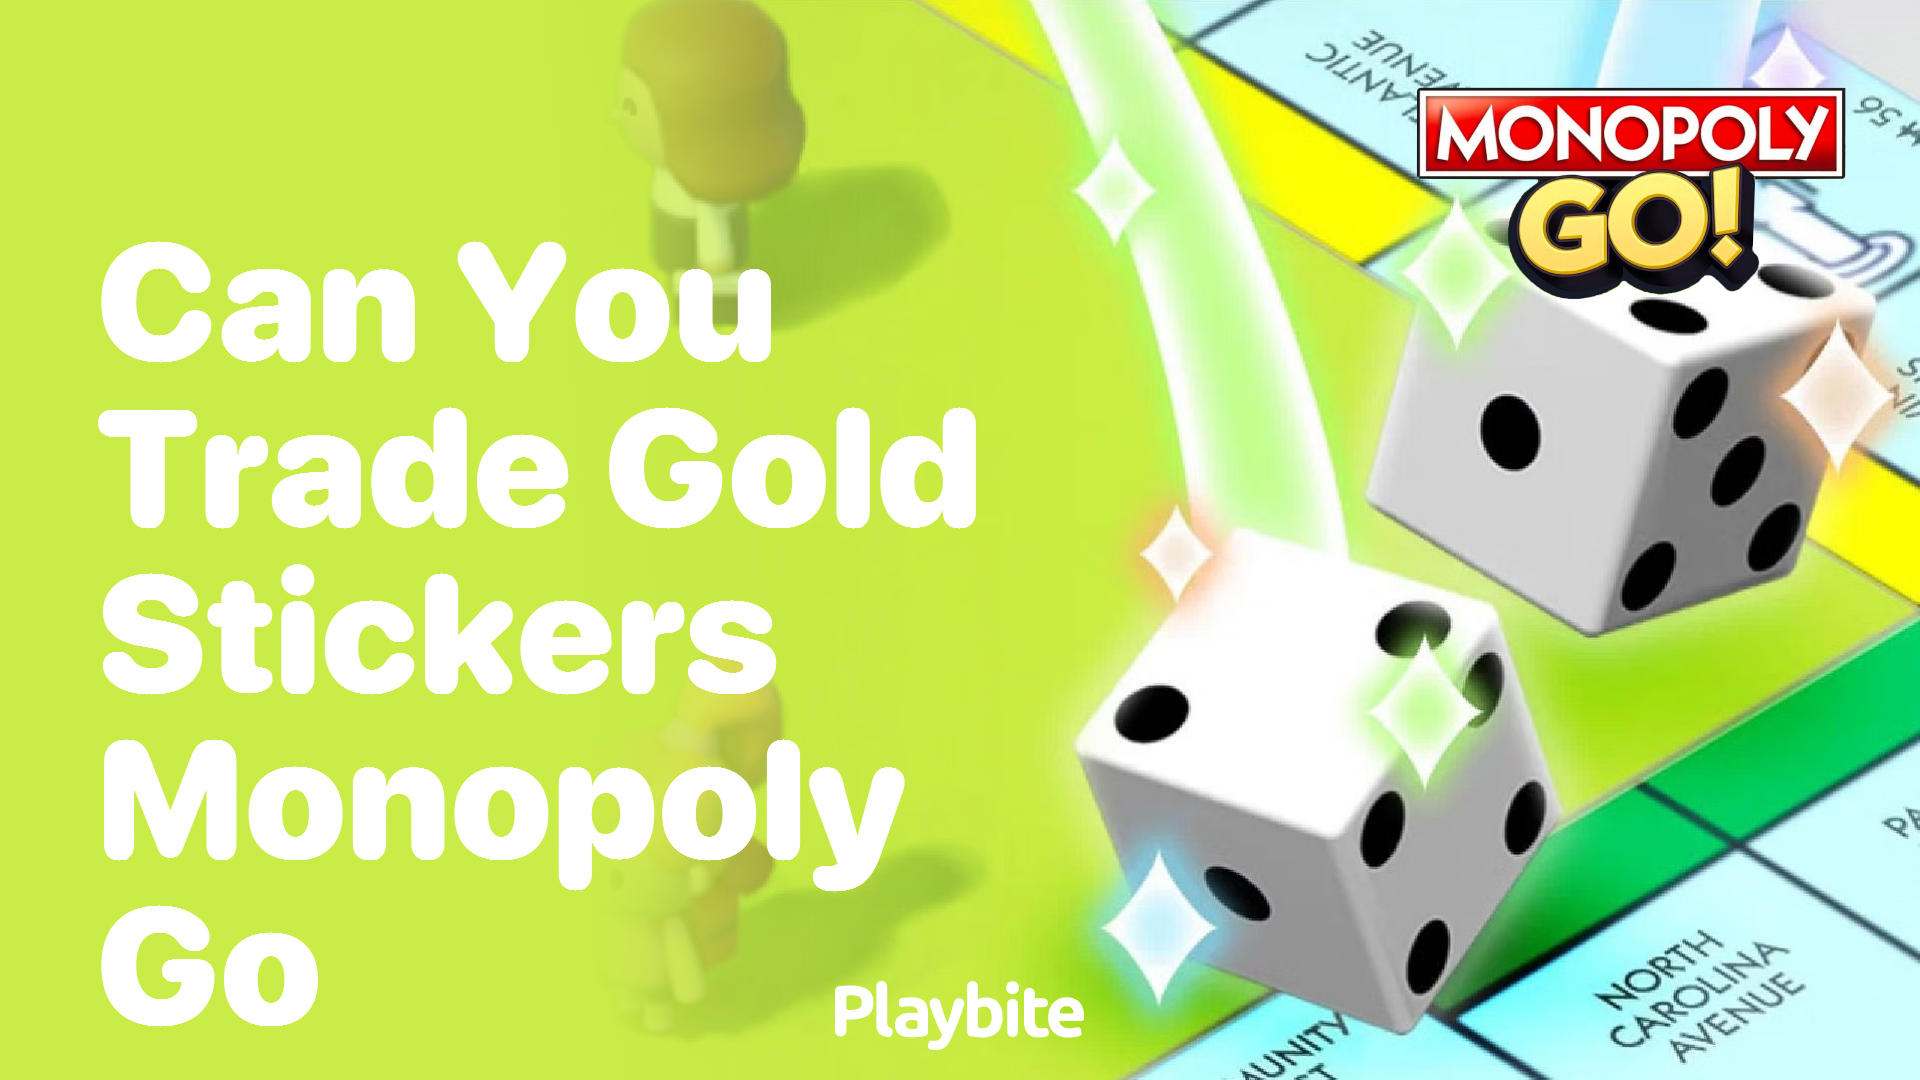 Can You Trade Gold Stickers in Monopoly Go?